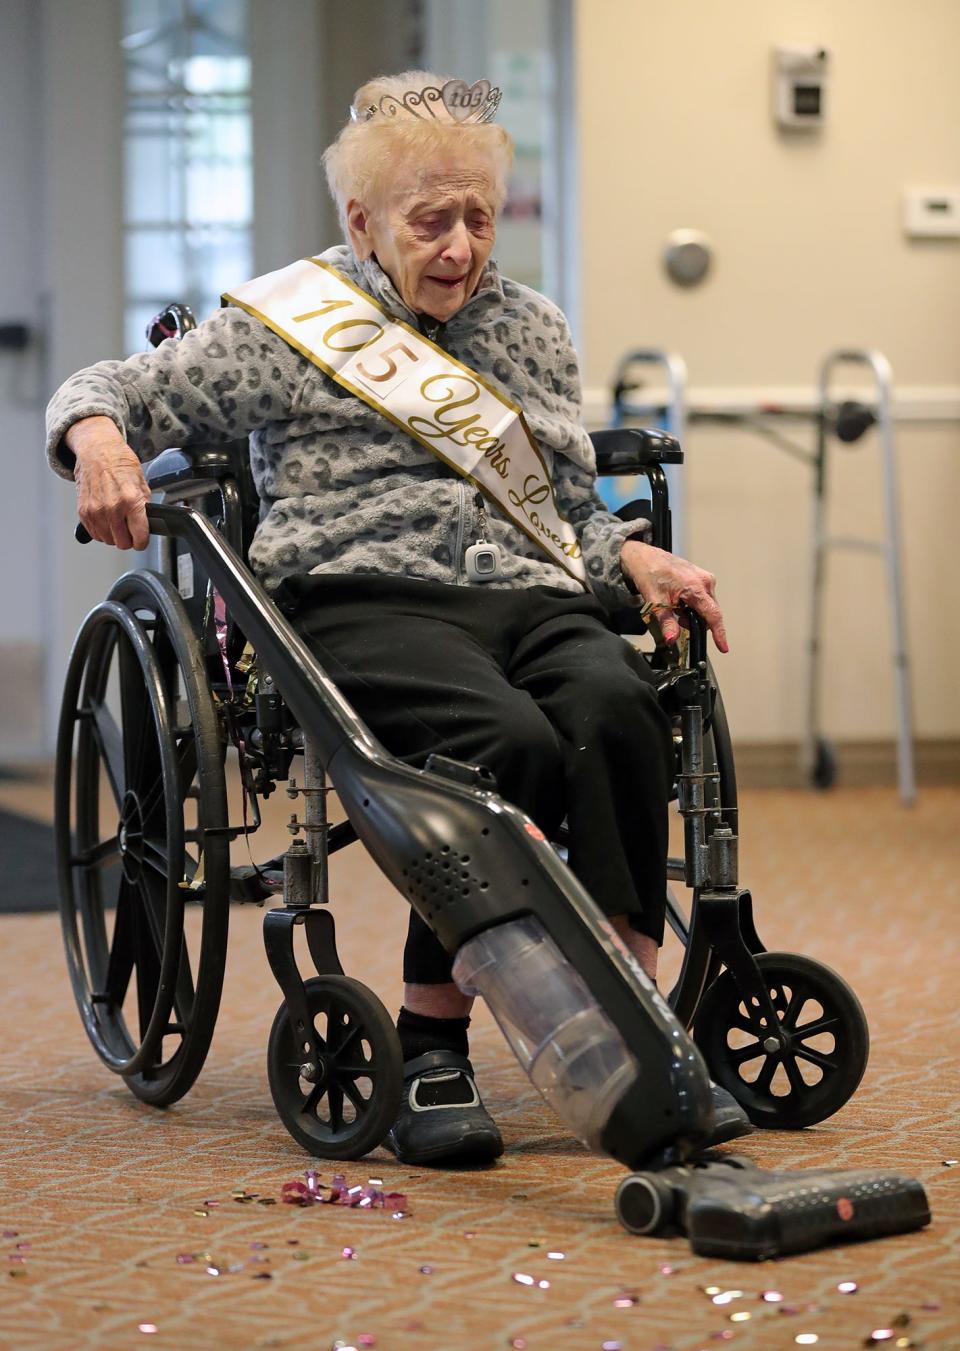 Helen Molnar jokingly sweeps up confetti after her 105th birthday party on Tuesday.